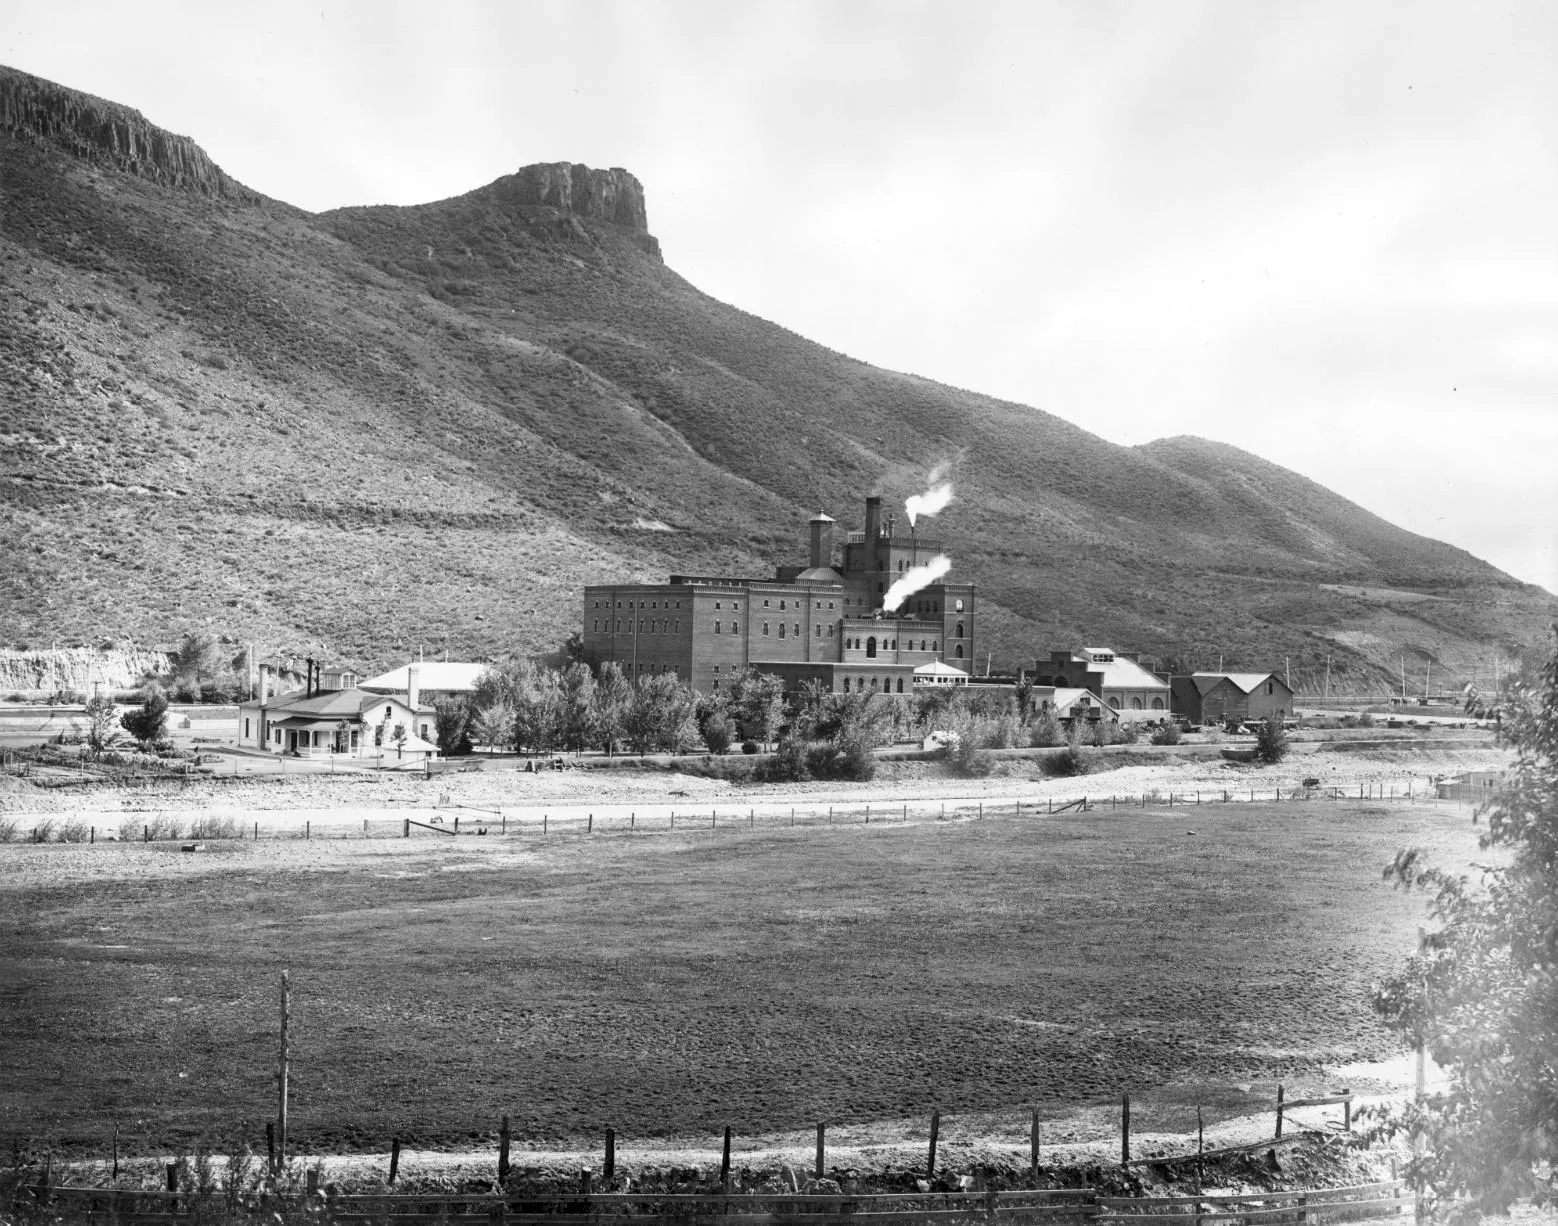 black and white image of Coors brick brewery and the Coors family home